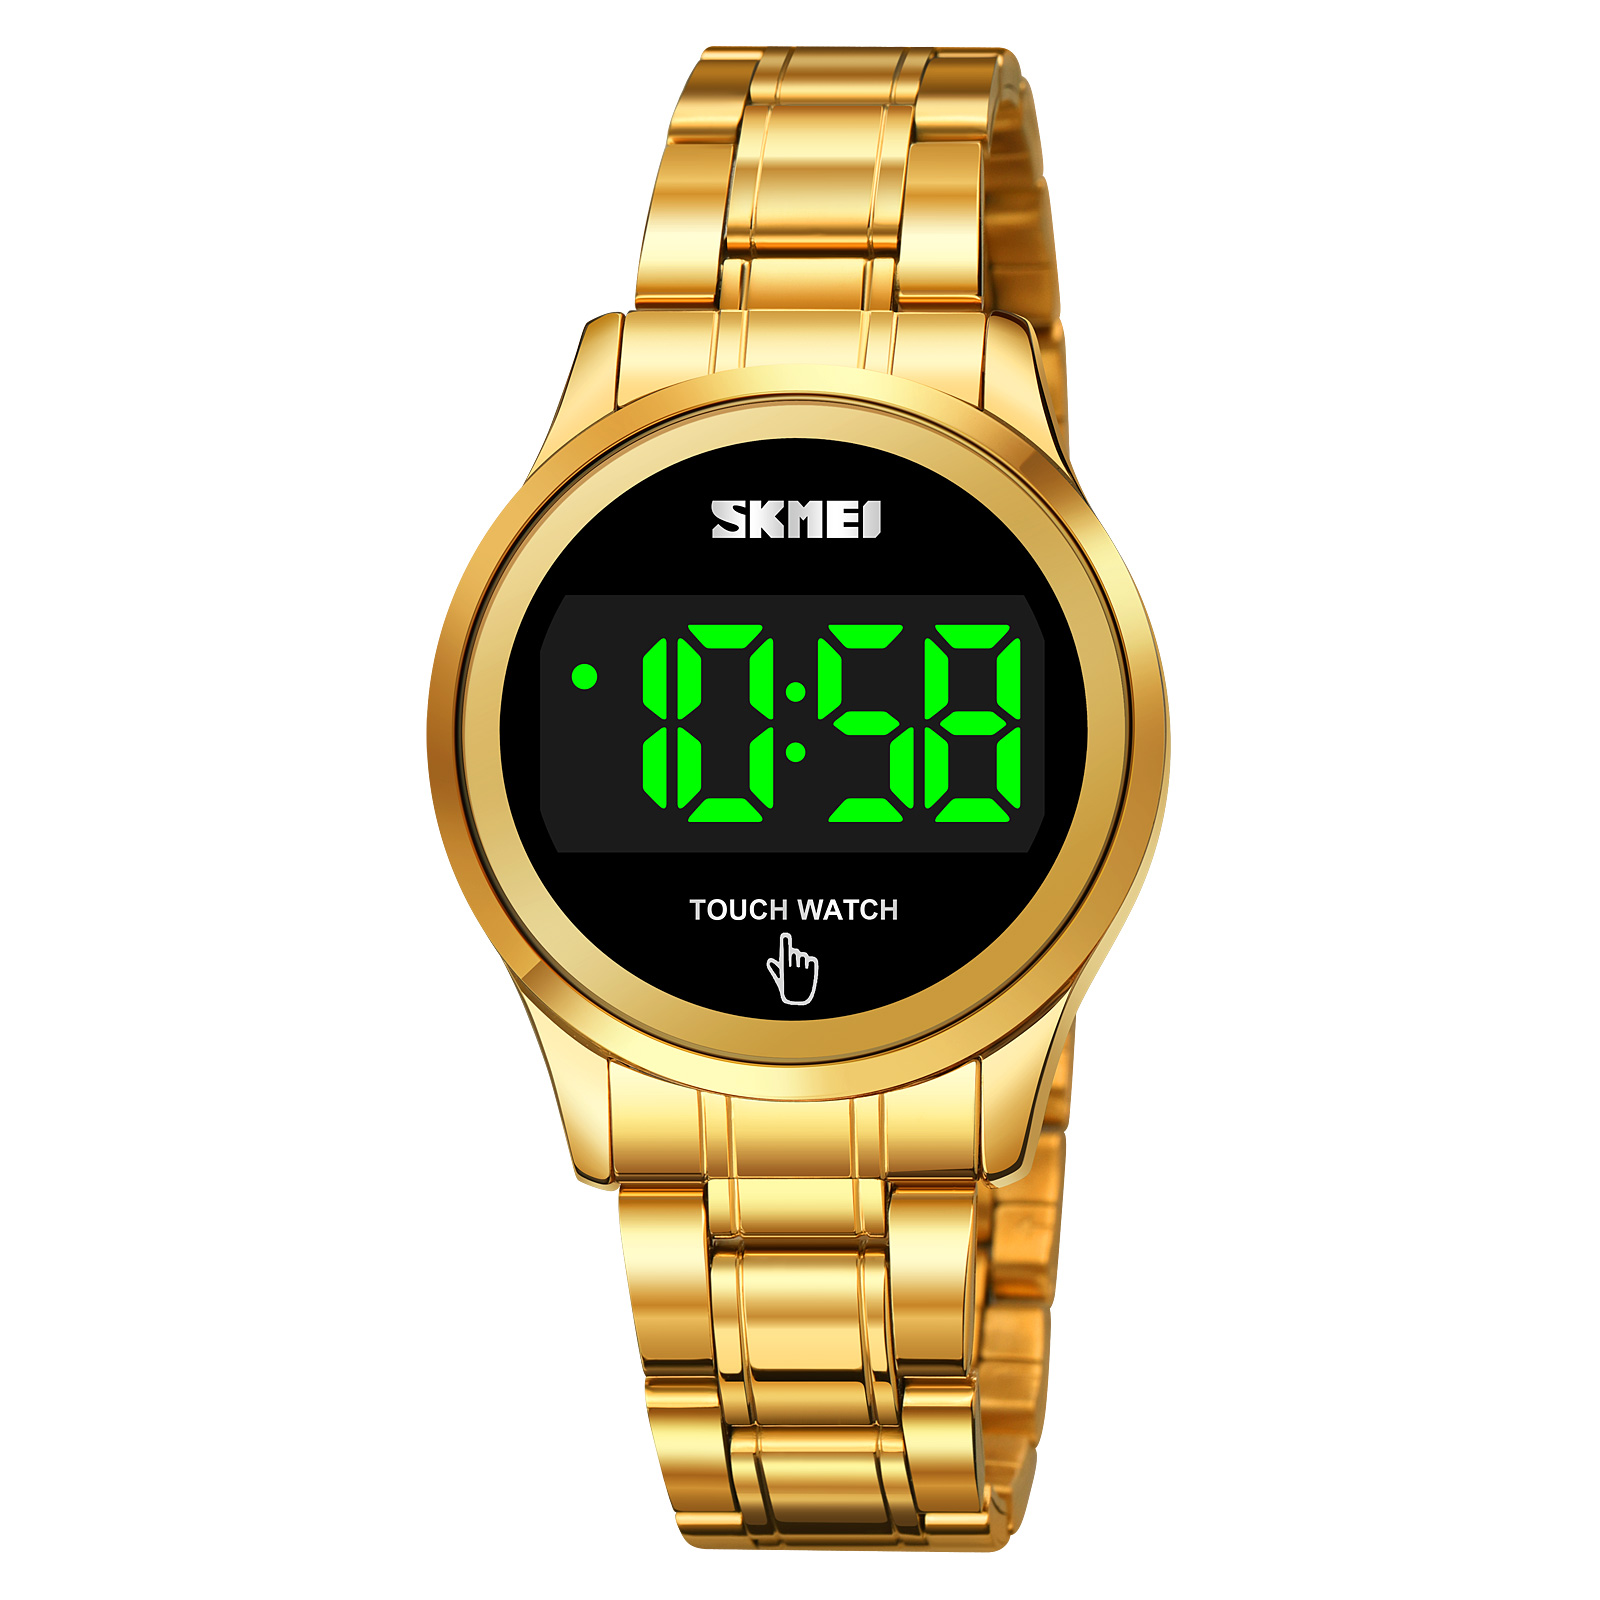 touch screen led watches -Skmei Watch Manufacture Co.,Ltd